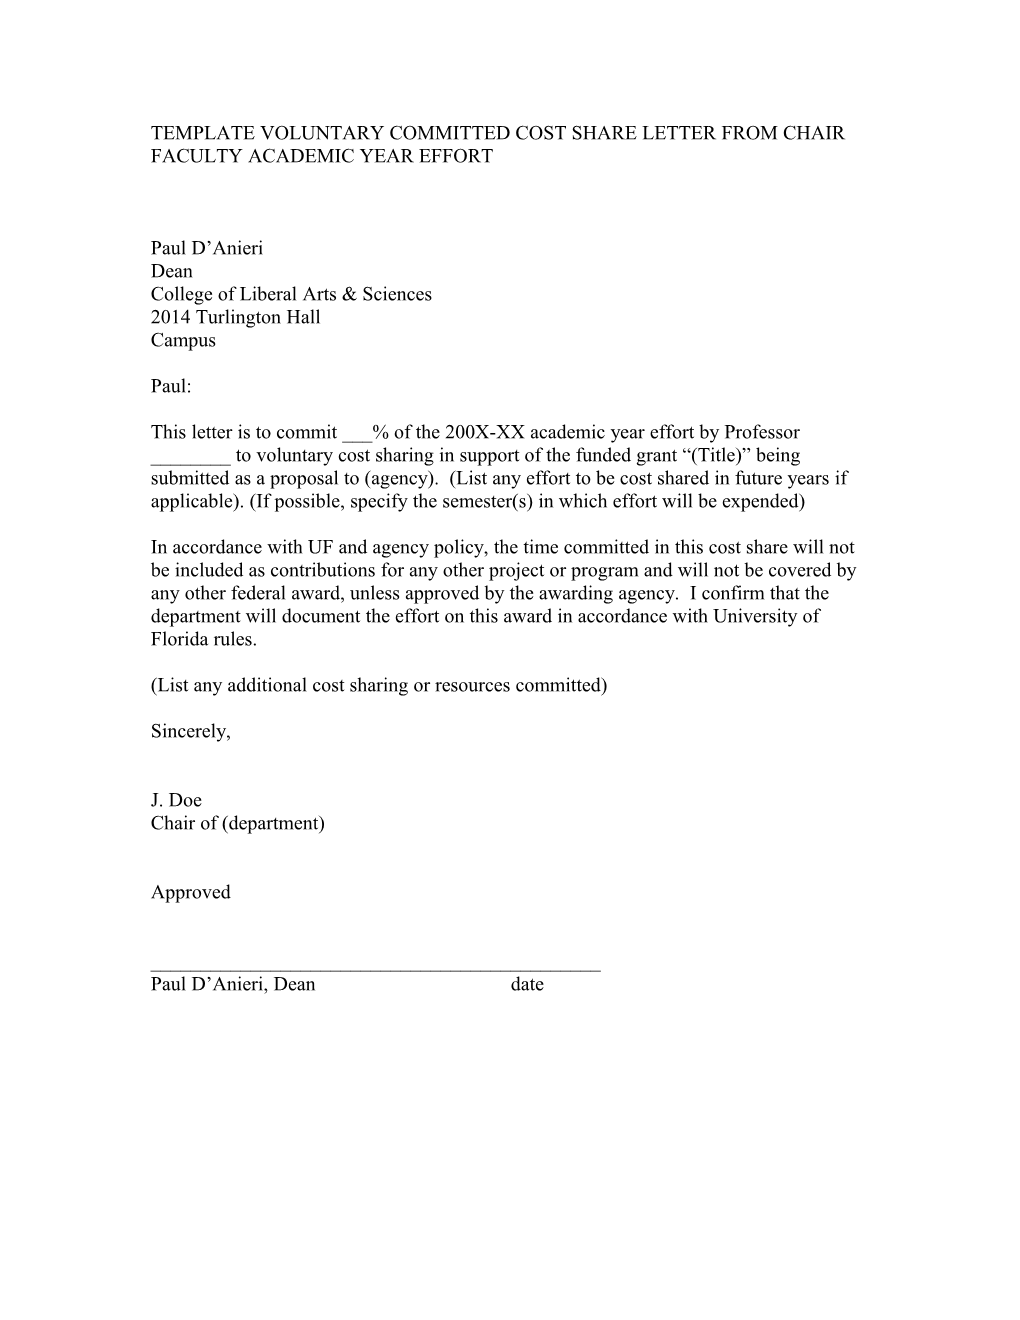 Template Voluntary Committed Cost Share Letter from Chair